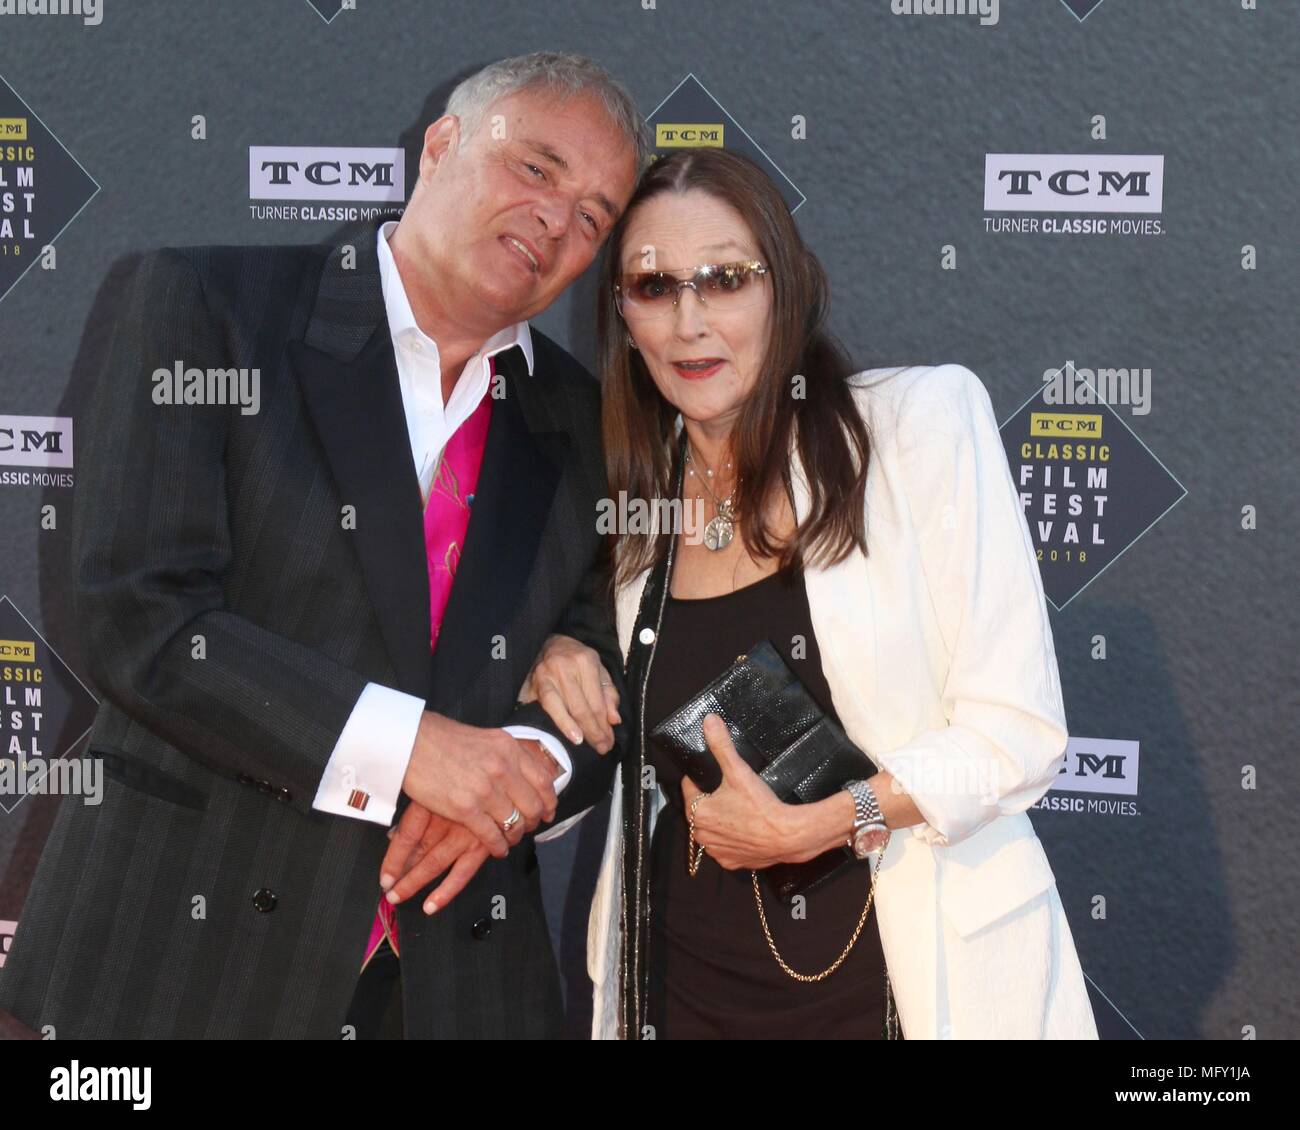 Los Angeles, CA, USA. 26th Apr, 2018. Leonard Whiting, Oliva Hussey at arrivals for The 50th Anniversary World Premiere Restoration of THE PRODUCERS at the Opening Night Gala of the 2018 TCM Classic Film Festival, TCL Chinese Theatre (formerly Grauman's), Los Angeles, CA April 26, 2018. Credit: Priscilla Grant/Everett Collection/Alamy Live News Stock Photo